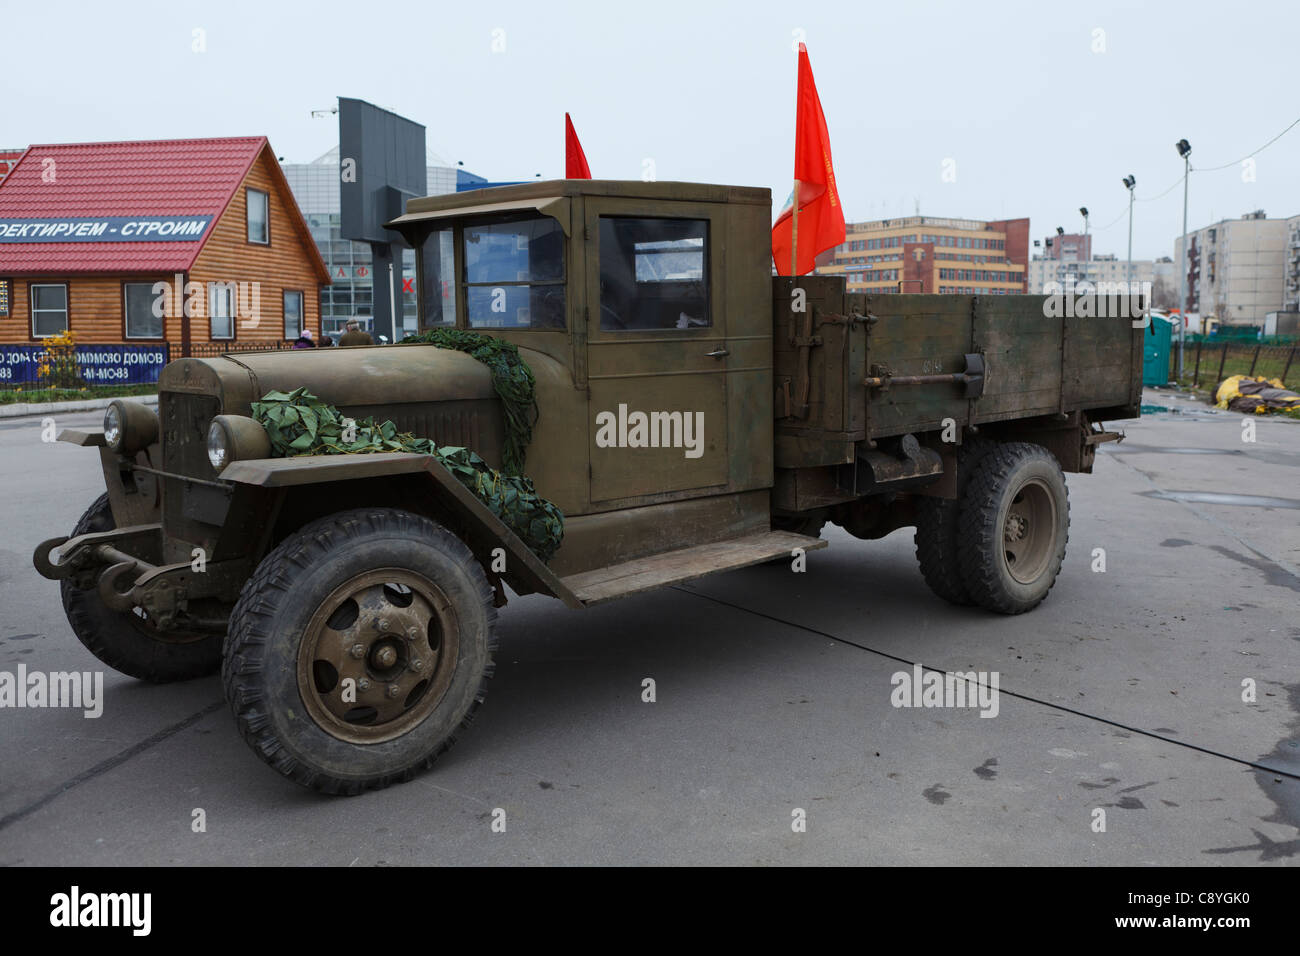 Soviet lorry ZIS-5 with red flags on November 4, 2011 in Saint-Petersburg, Russia. Stock Photo